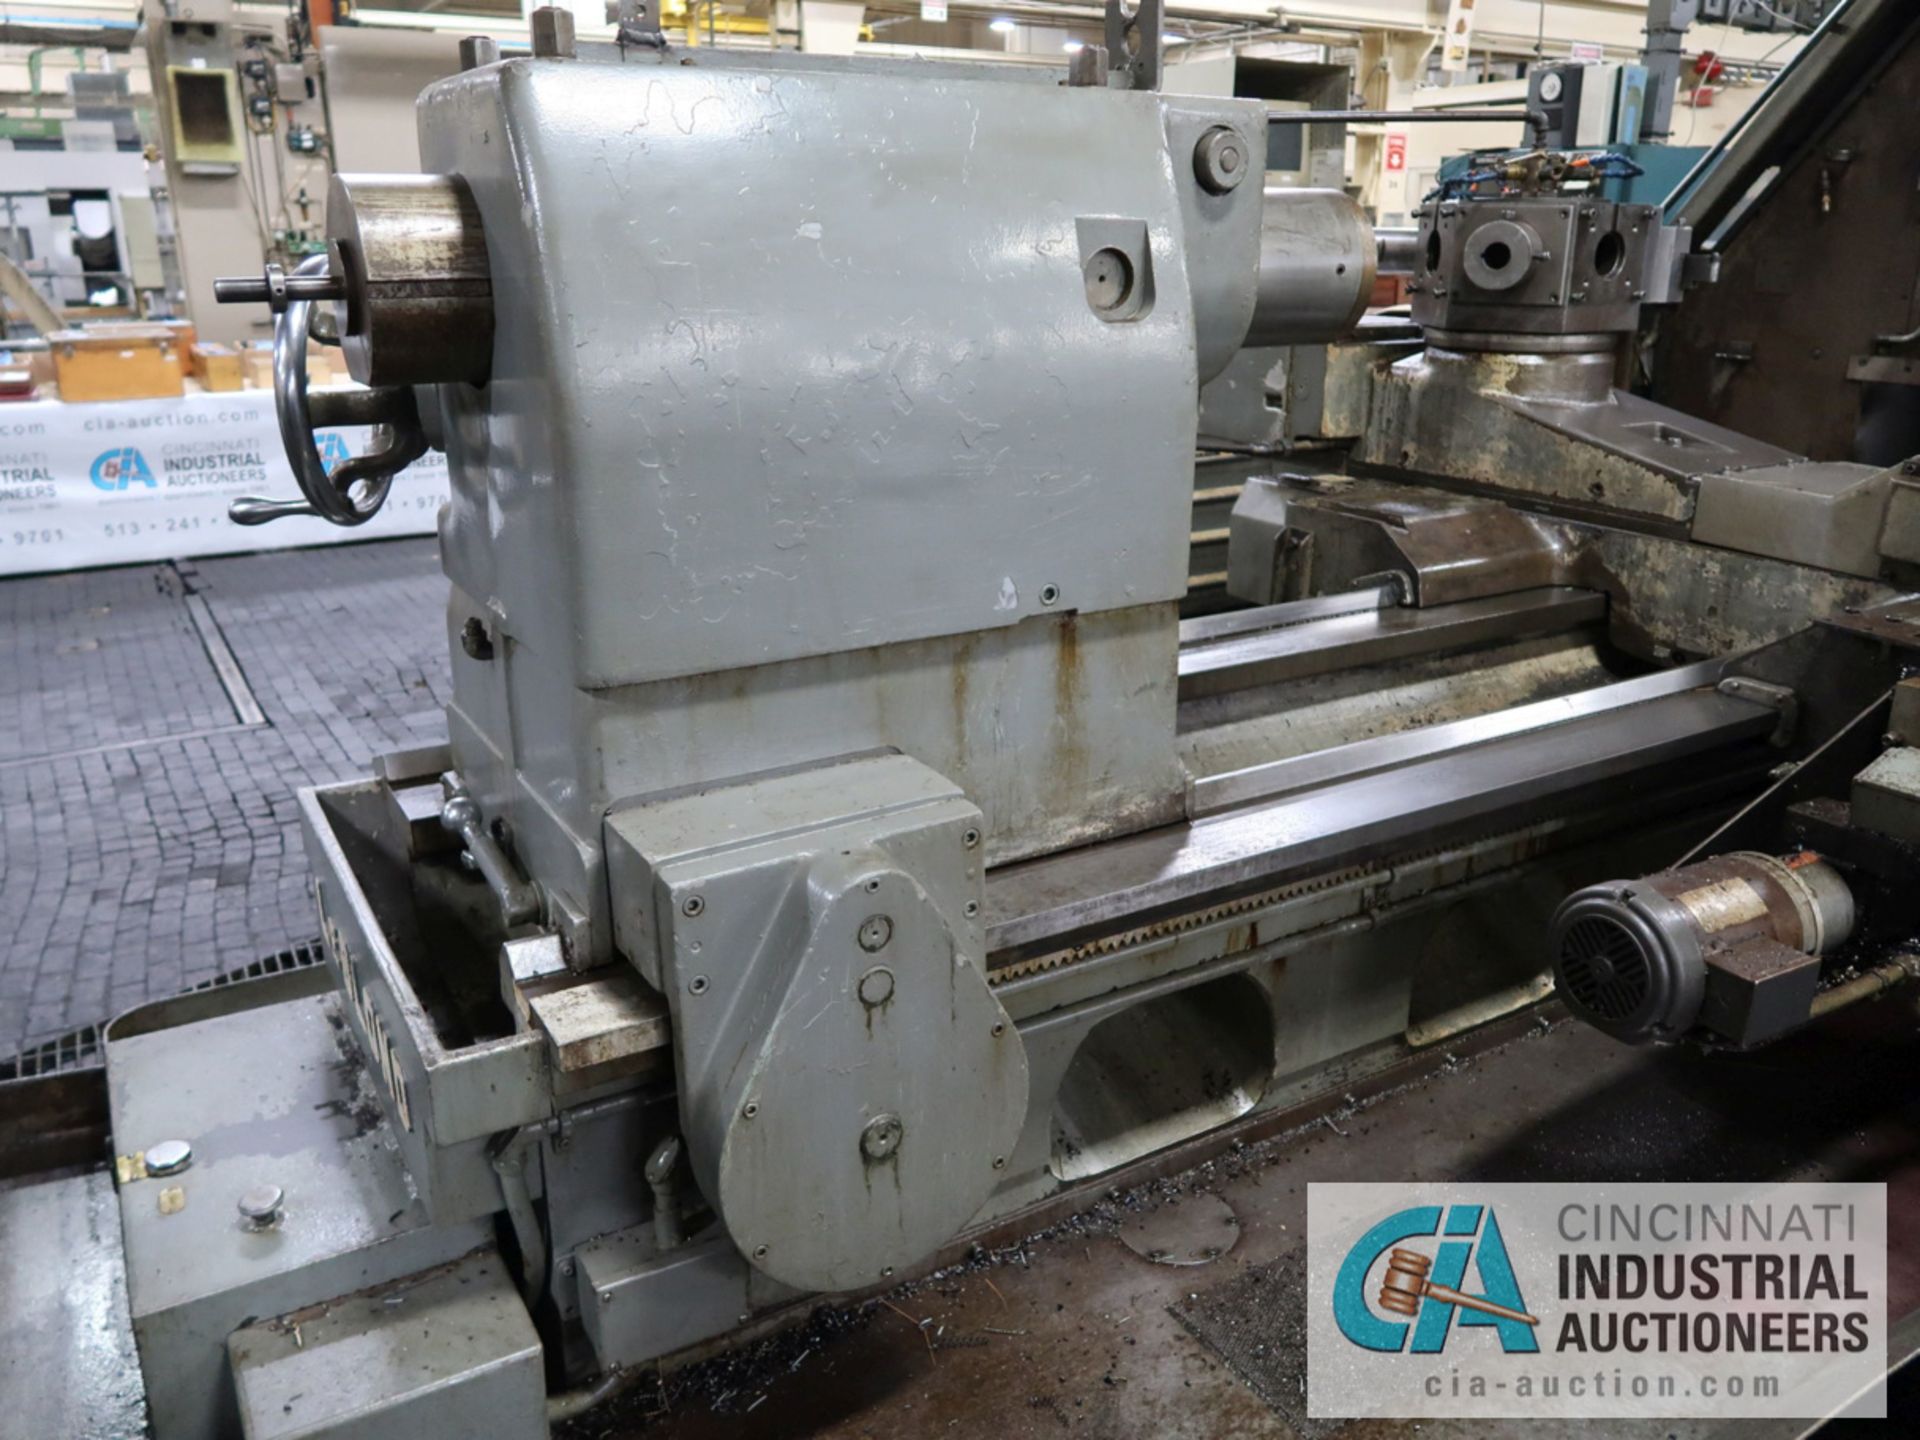 48” X 108” LEBLOND 15” HOLLOW SPINDLE MODEL 5029 N/C FLAT BED LATHE; GE 1050 CONTROL, 32” CHUCK, - Image 13 of 22